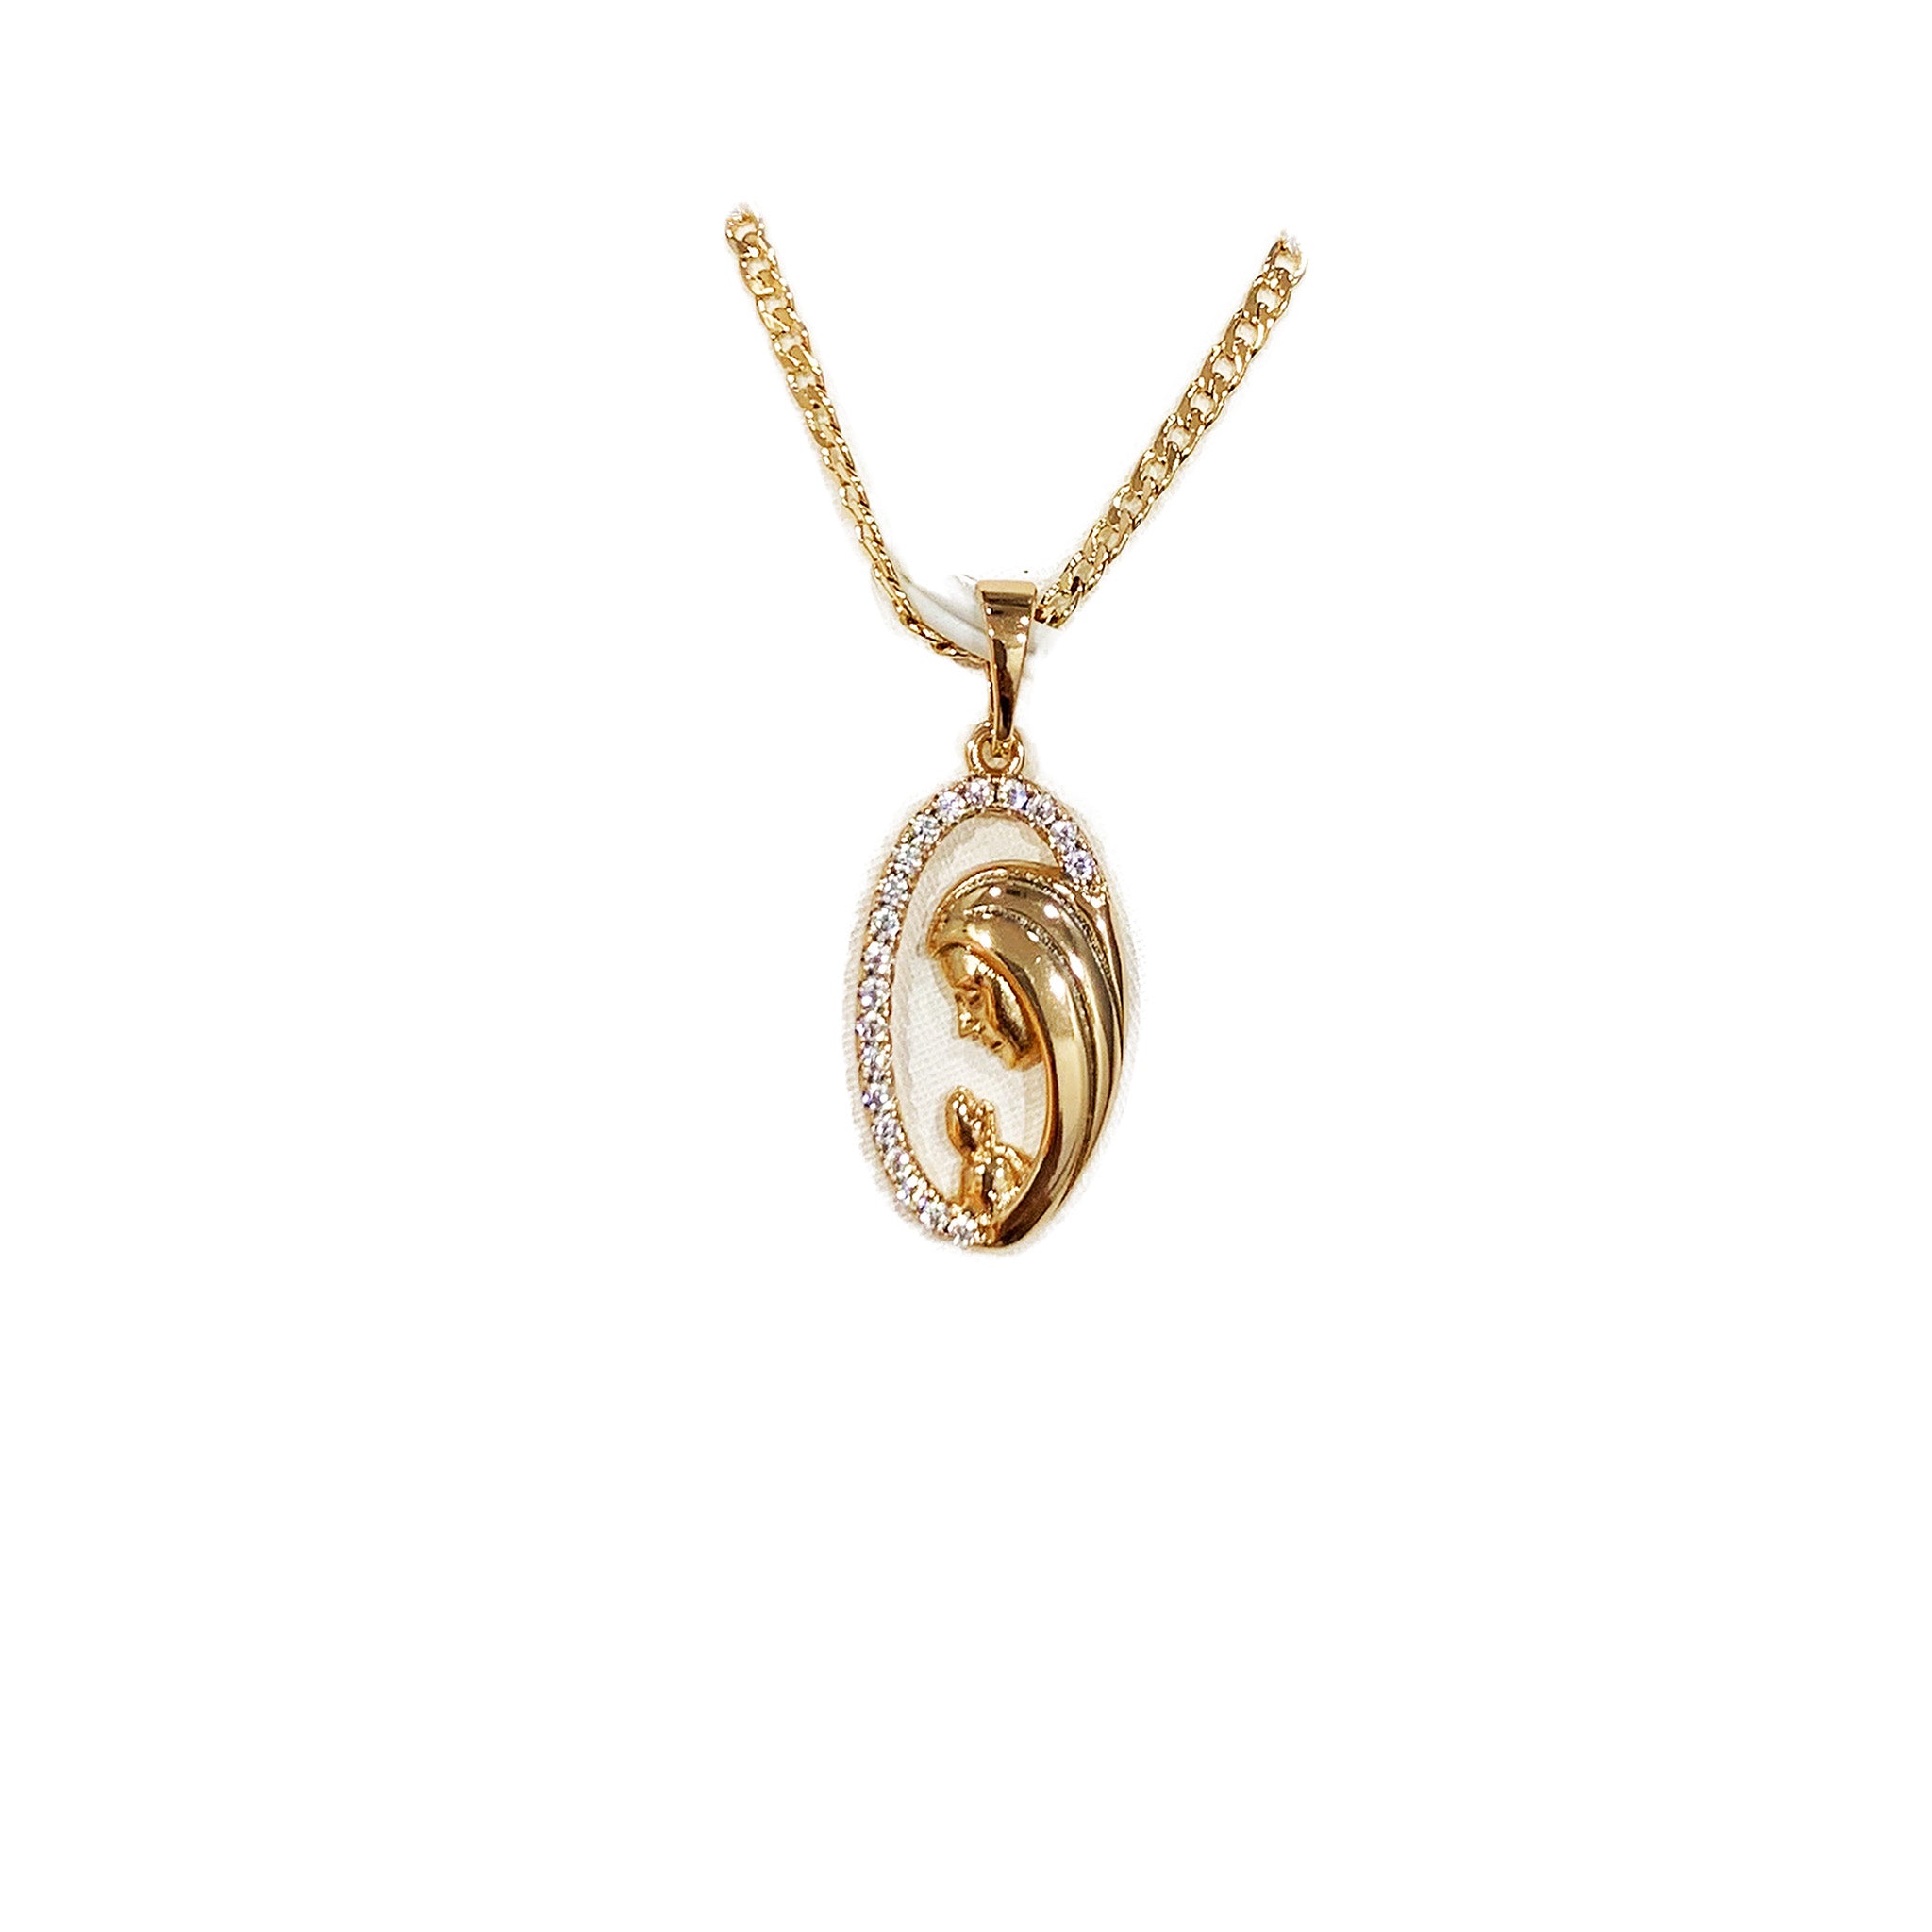 PRAYING LADY PENDANT NECKLACE (GOLD-PLATED)